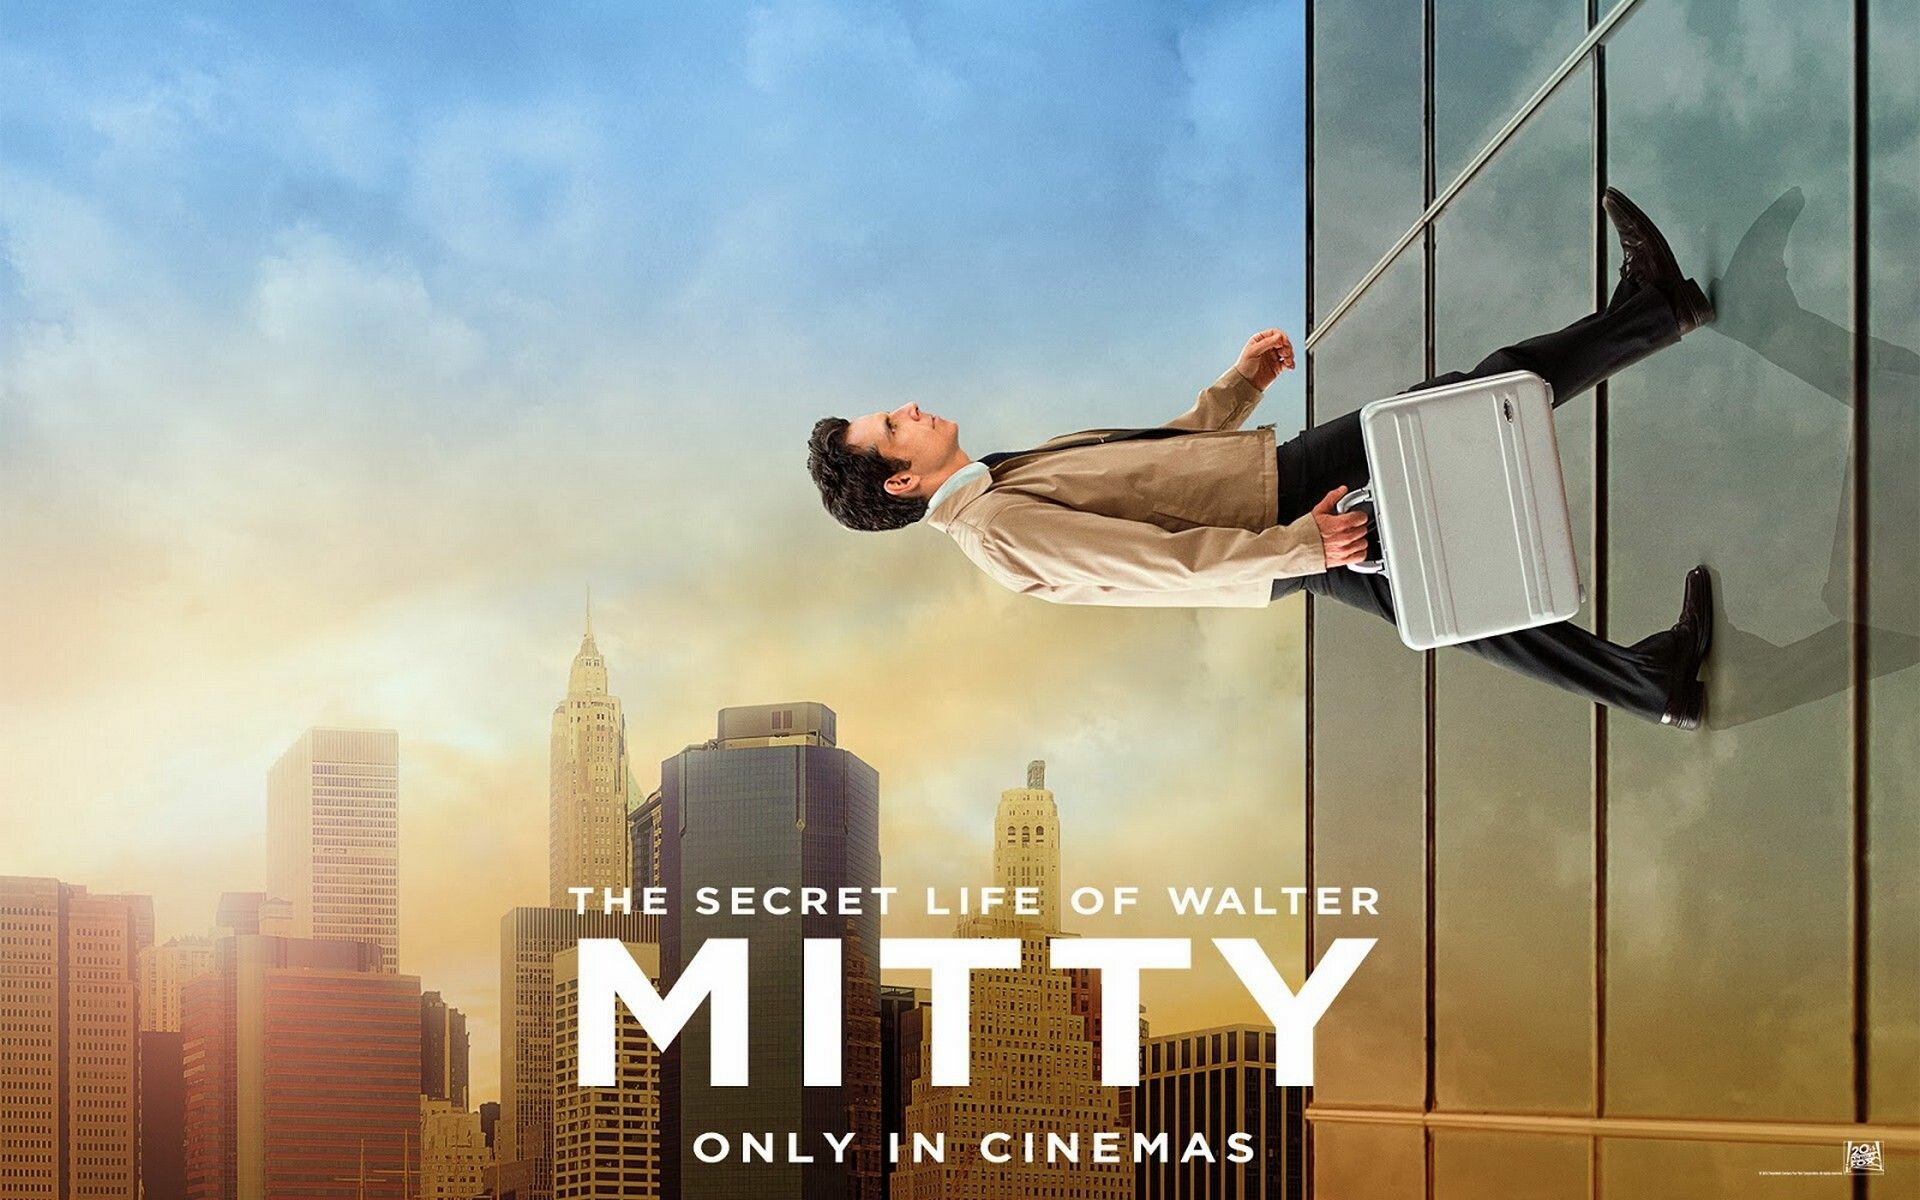 The Secret Life of Walter Mitty: The main message from this movie is that life is much more fun if you actually live it rather than dreaming about it, Directed by Ben Stiller. 1920x1200 HD Wallpaper.